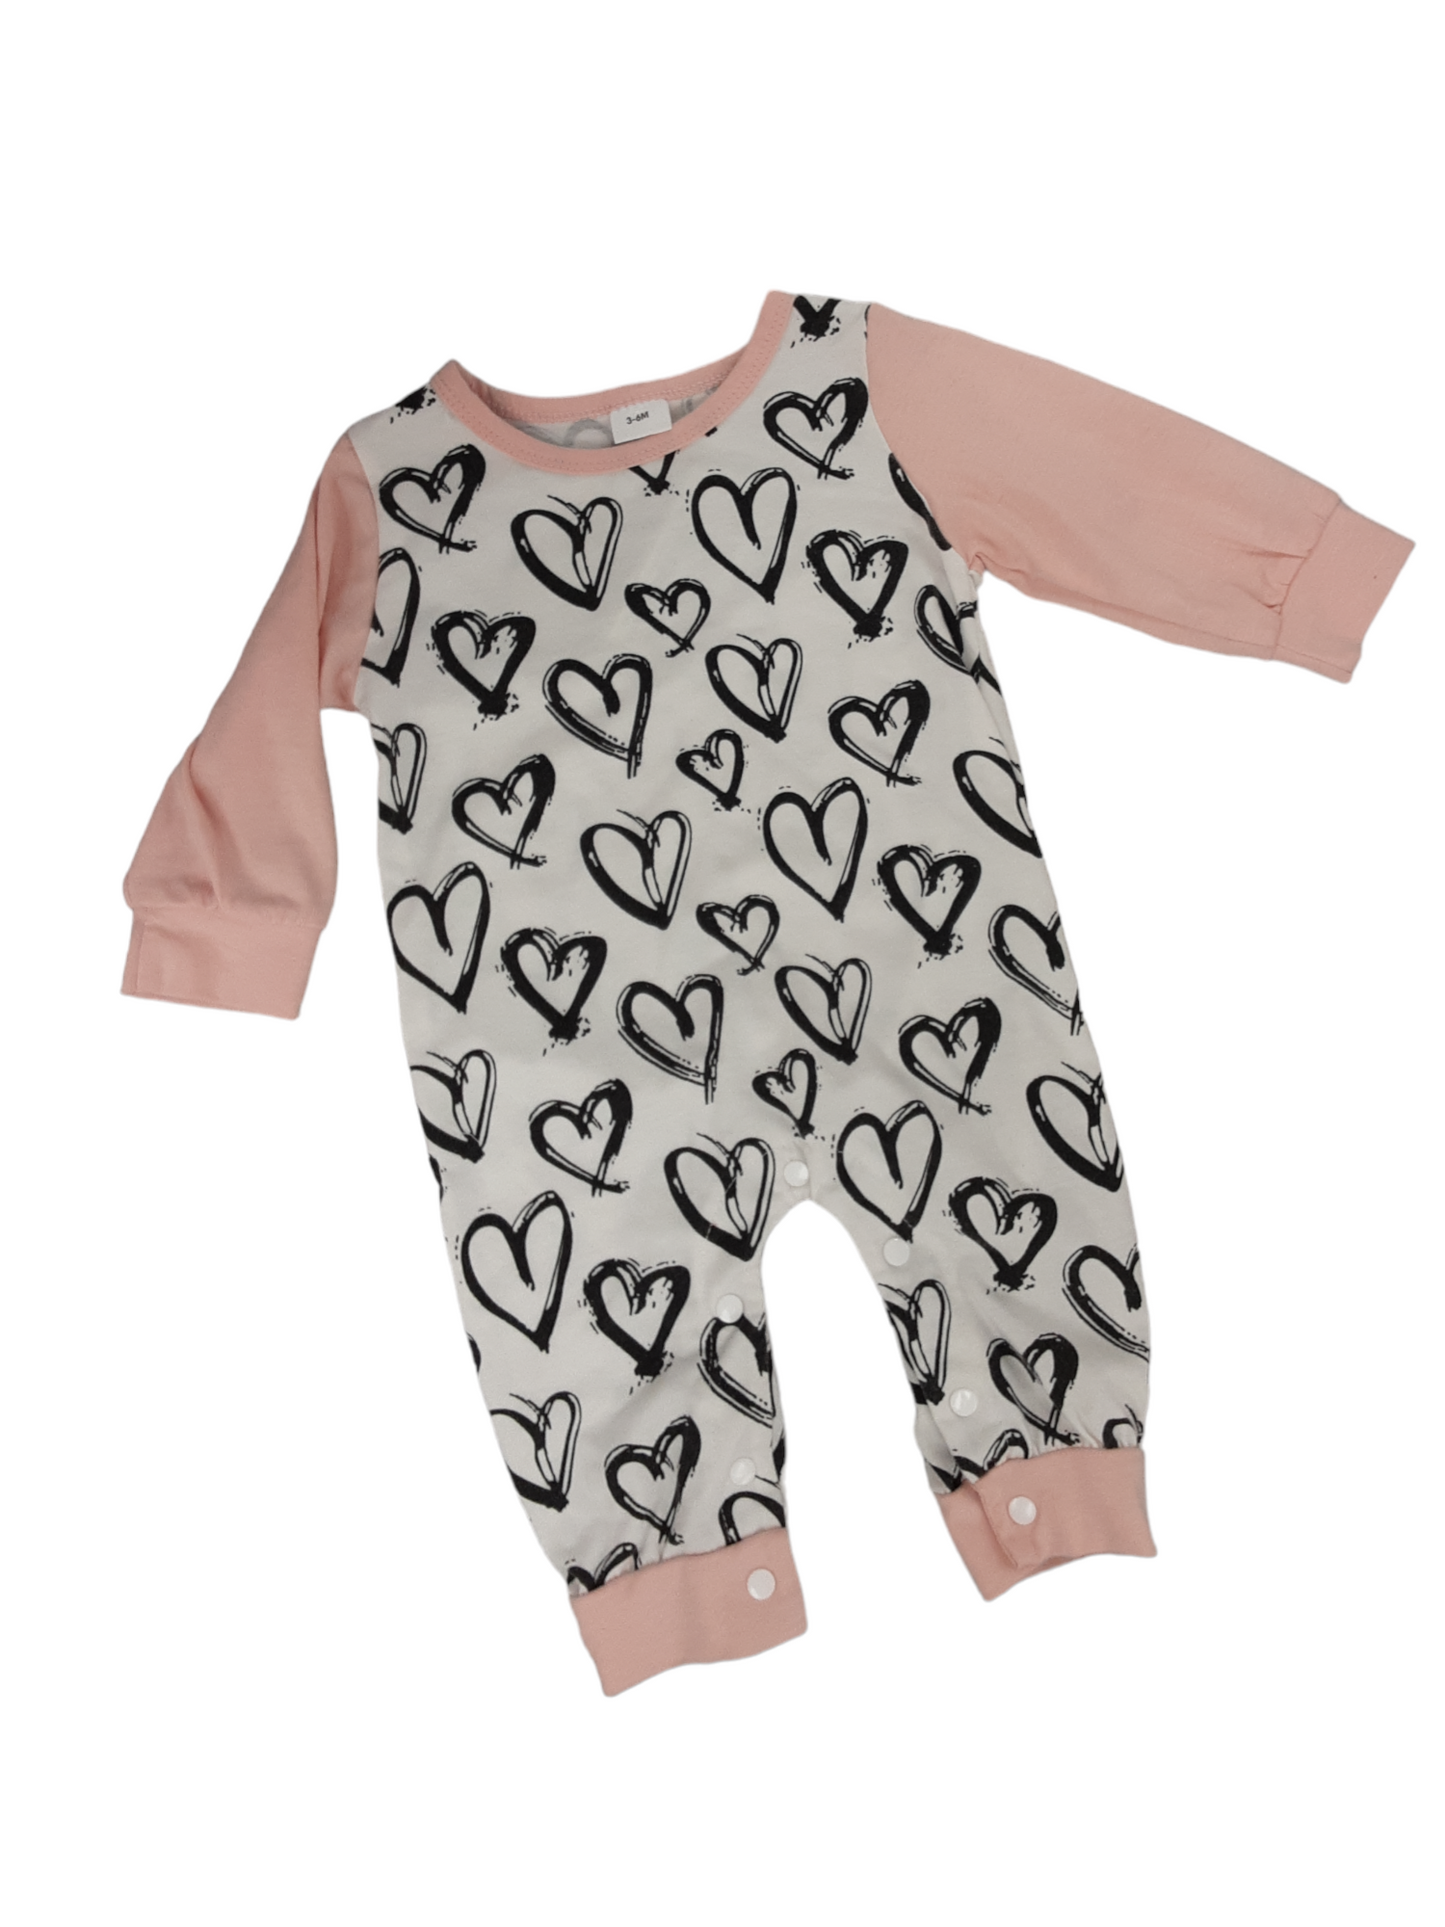 Heart patterned 3 to 6 month sleeper